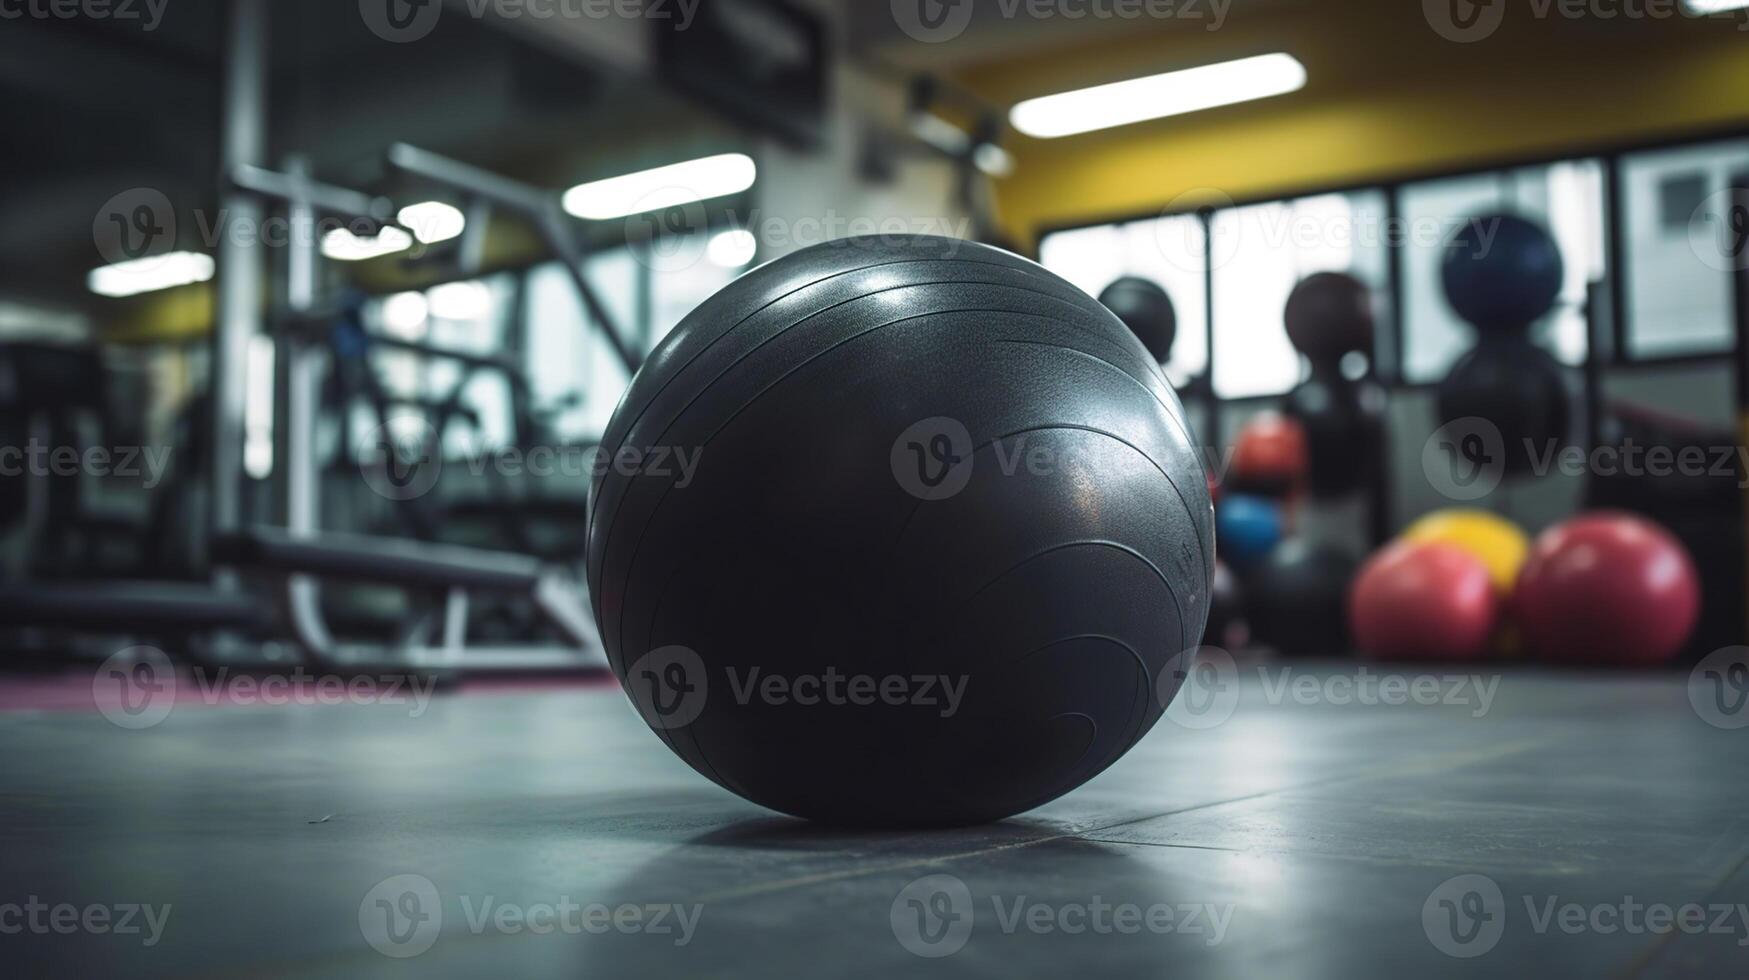 Different sports equipment and fitness ball in gym, photo